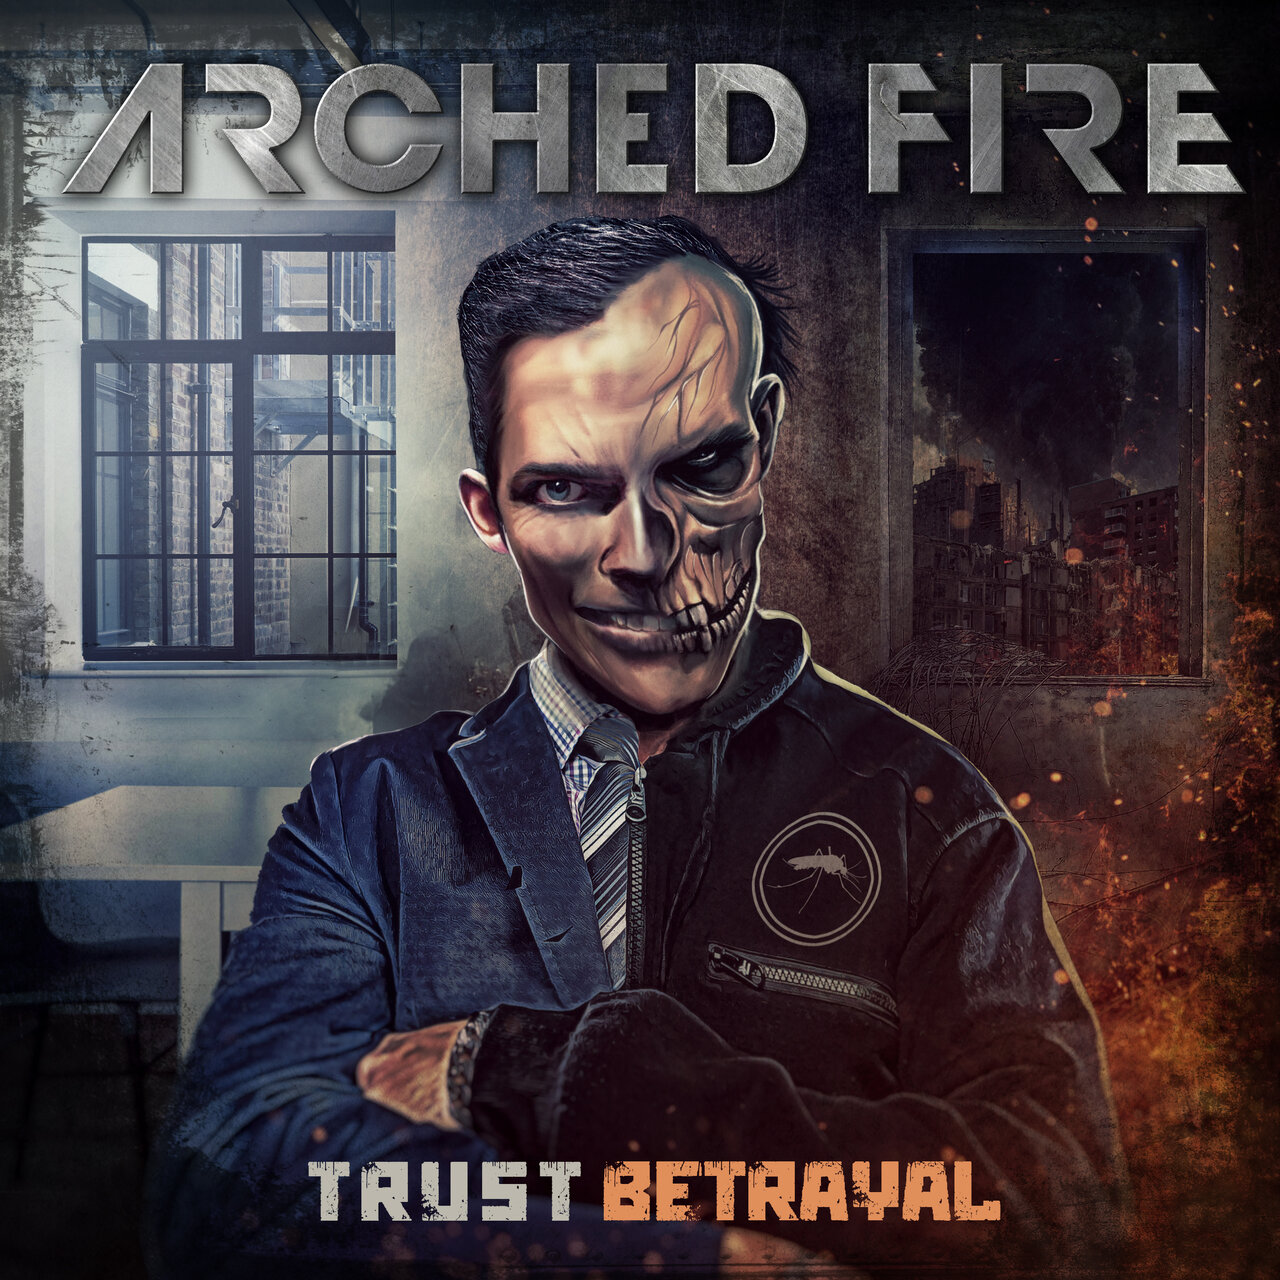 Arched Fire - "Trust Betrayal" - 2023